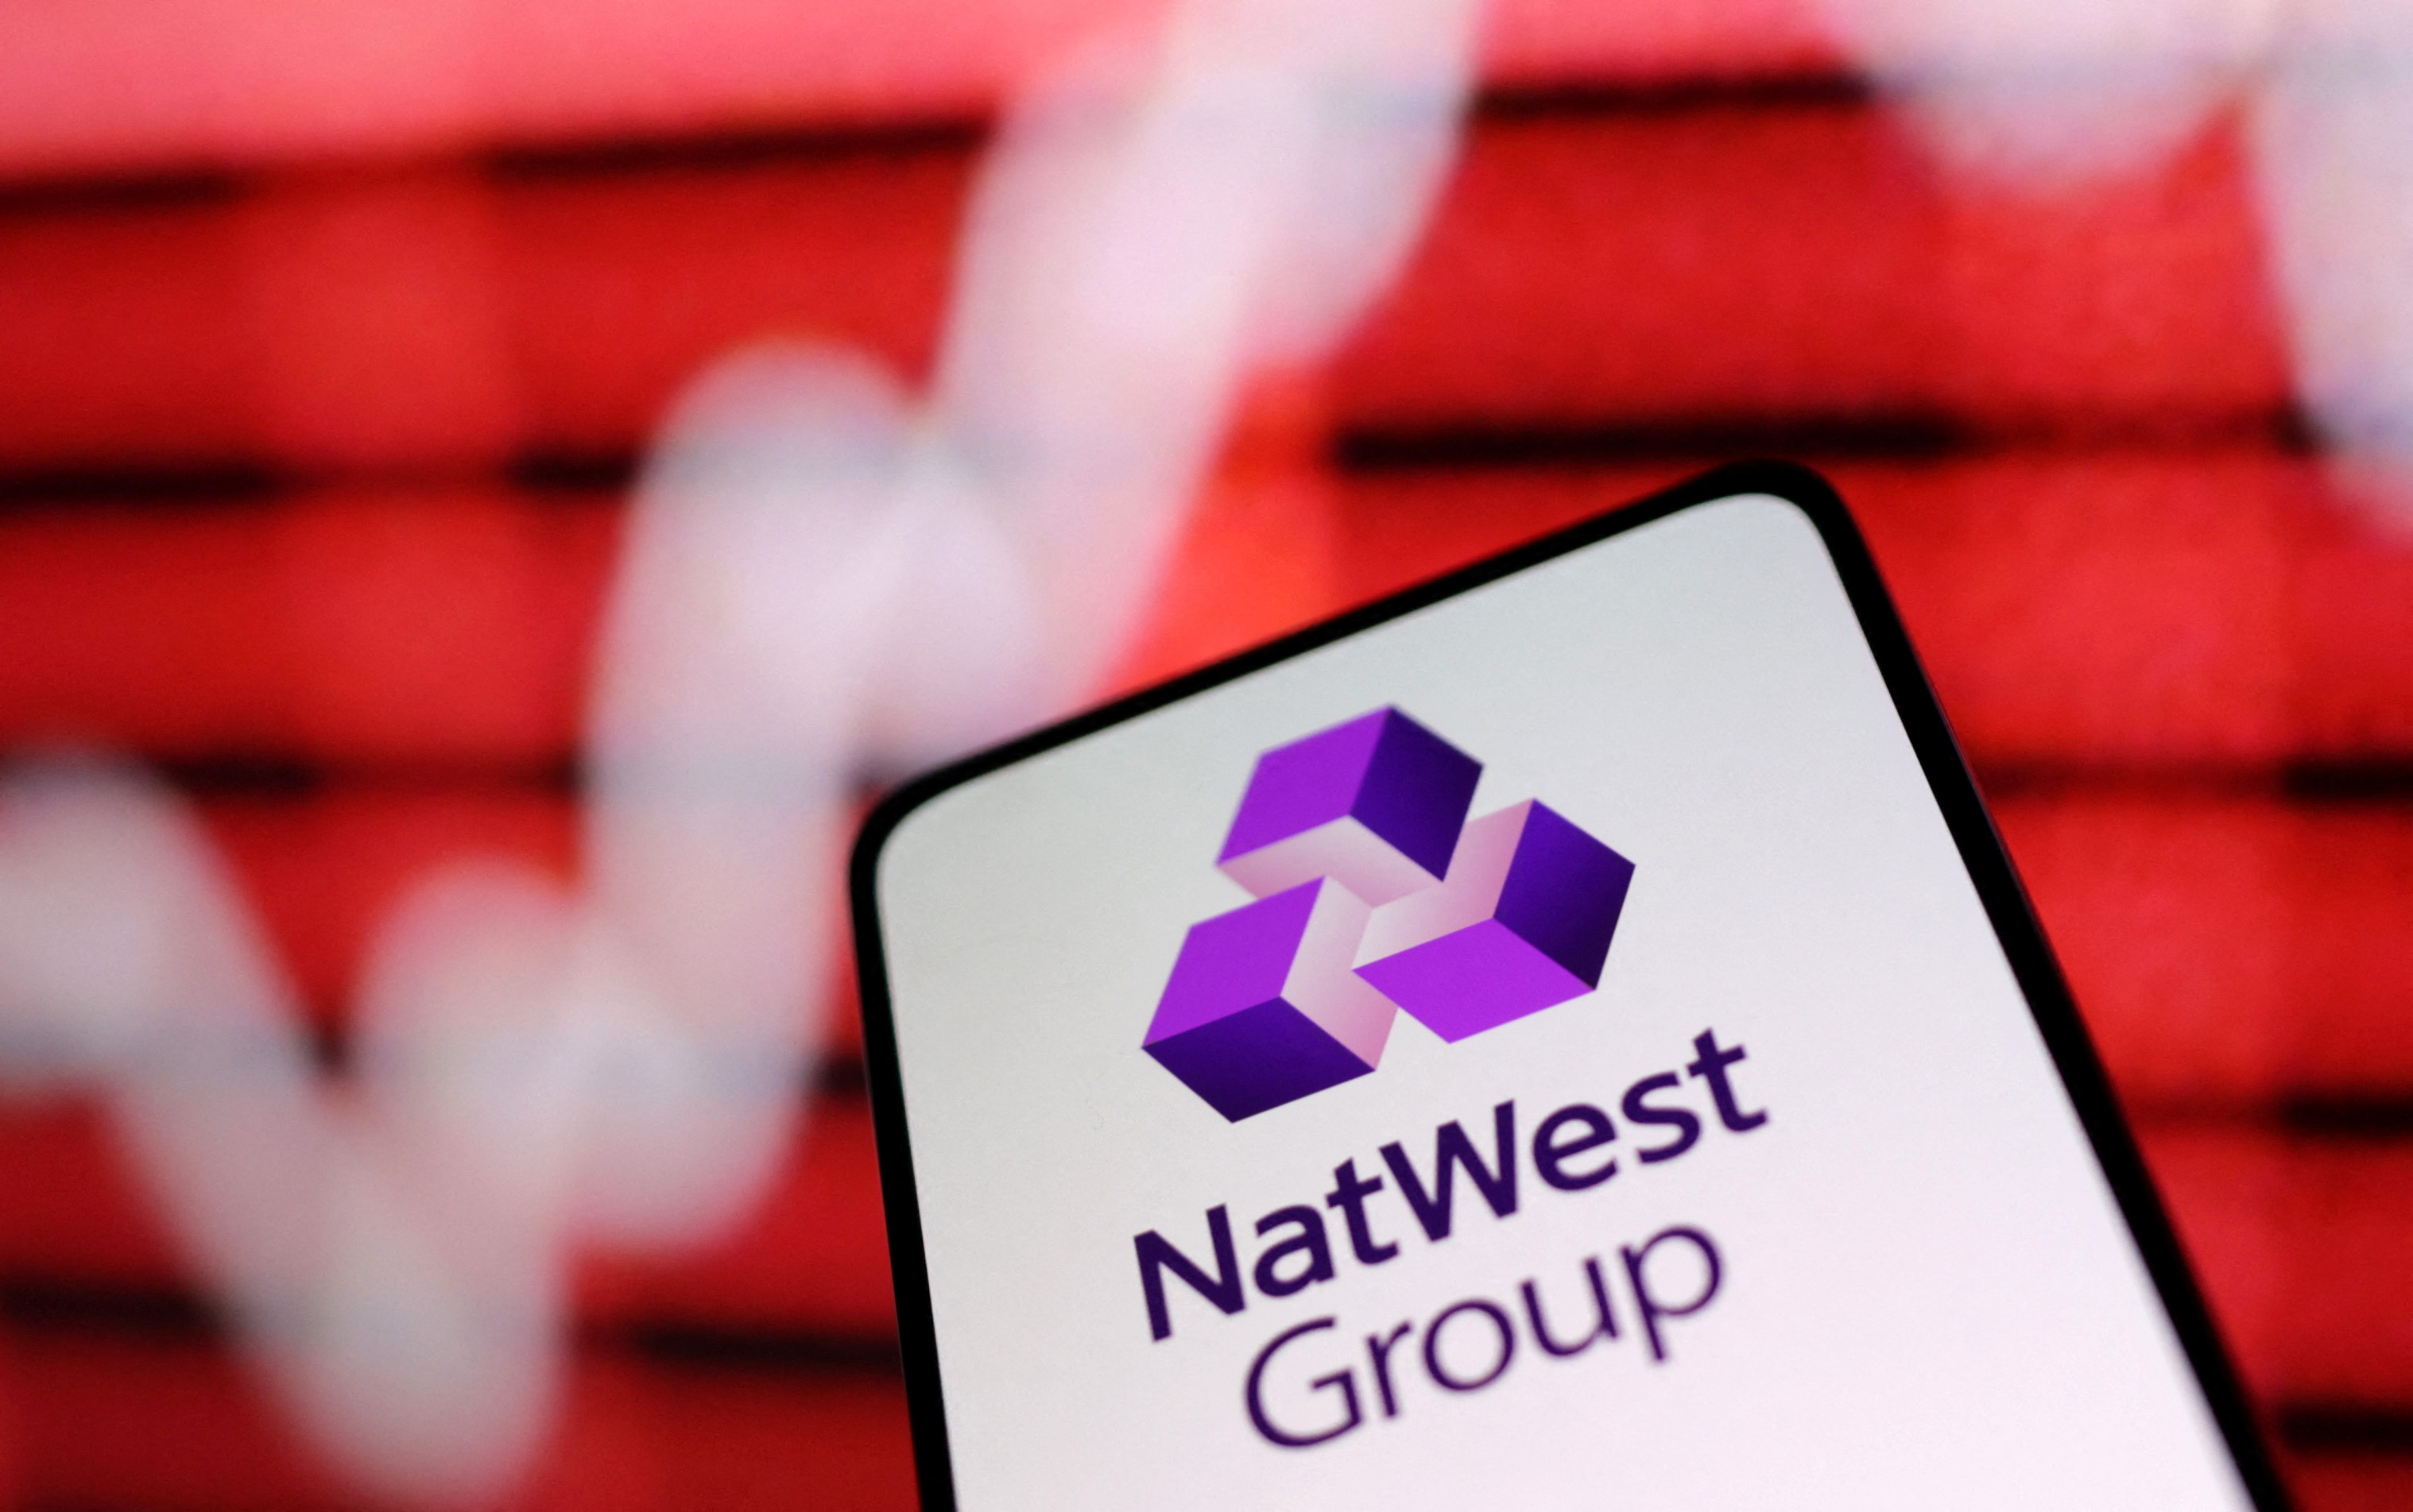 Illustration shows NatWest Group bank logo and rising stock graph